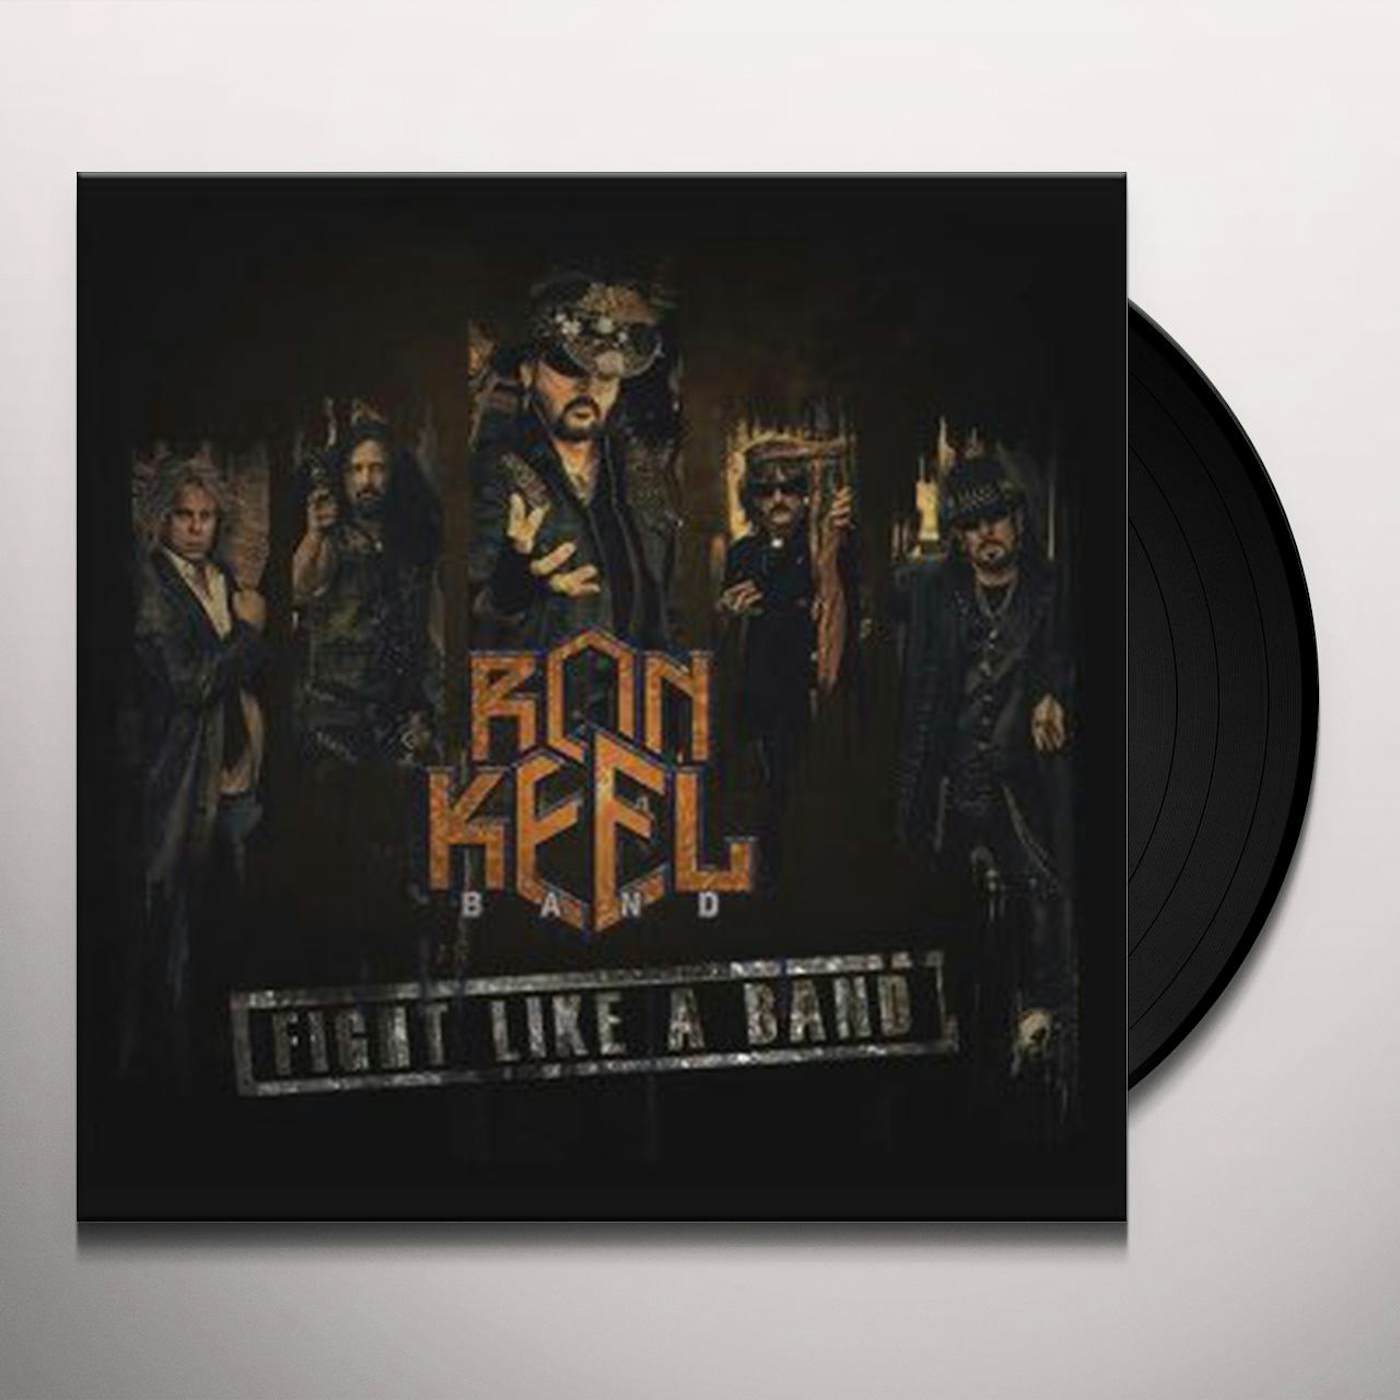 Ron Keel Fight Like A Band Vinyl Record